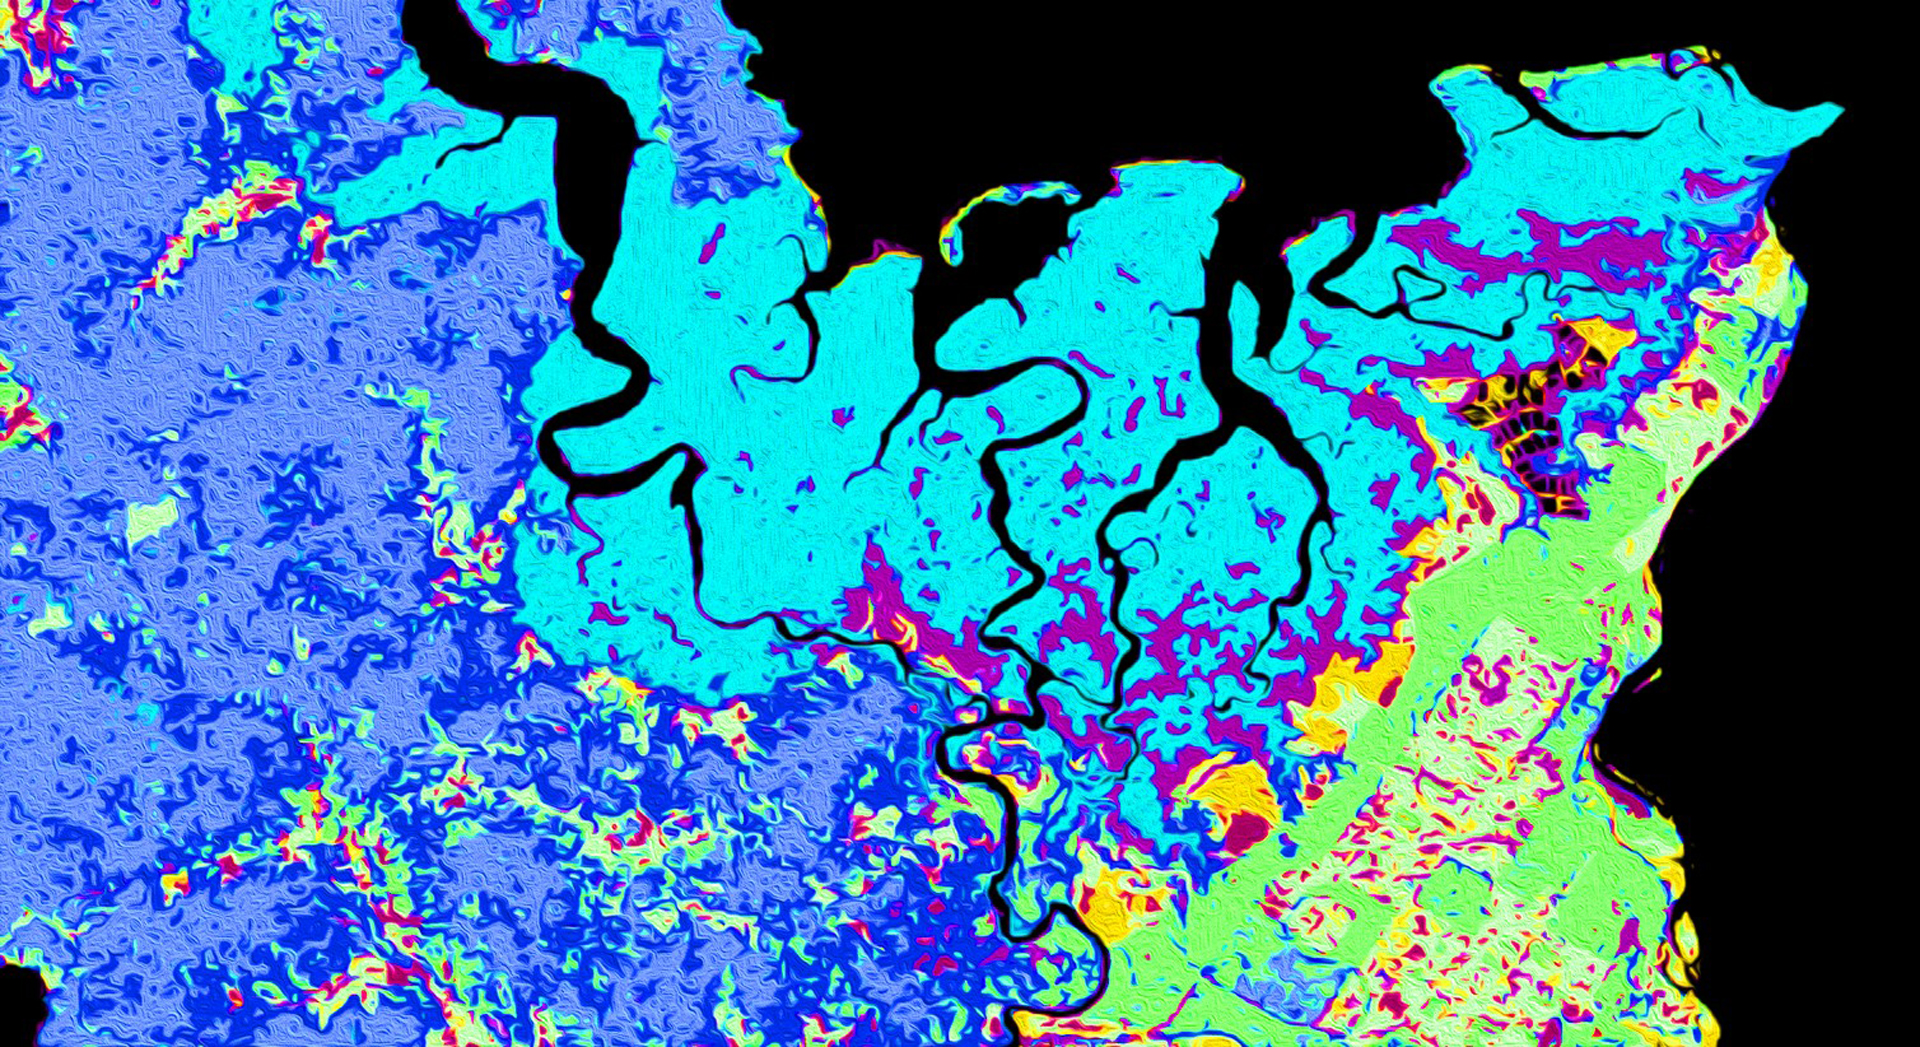 Landsat 8 Operational Land Imager (OLI) 2018 through 2019 surface reflectance data were used to distinguish land use and land cover in the southern Puntarenas Province, Costa Rica, specifically around the Terraba Sierpe National Wetlands. These data were used to inform a land trend analysis to forecast land cover to 2030. Highlighted features include mangroves shown in turquoise, primary and secondary forest shown in light and dark blue and palm plantations shown in green.